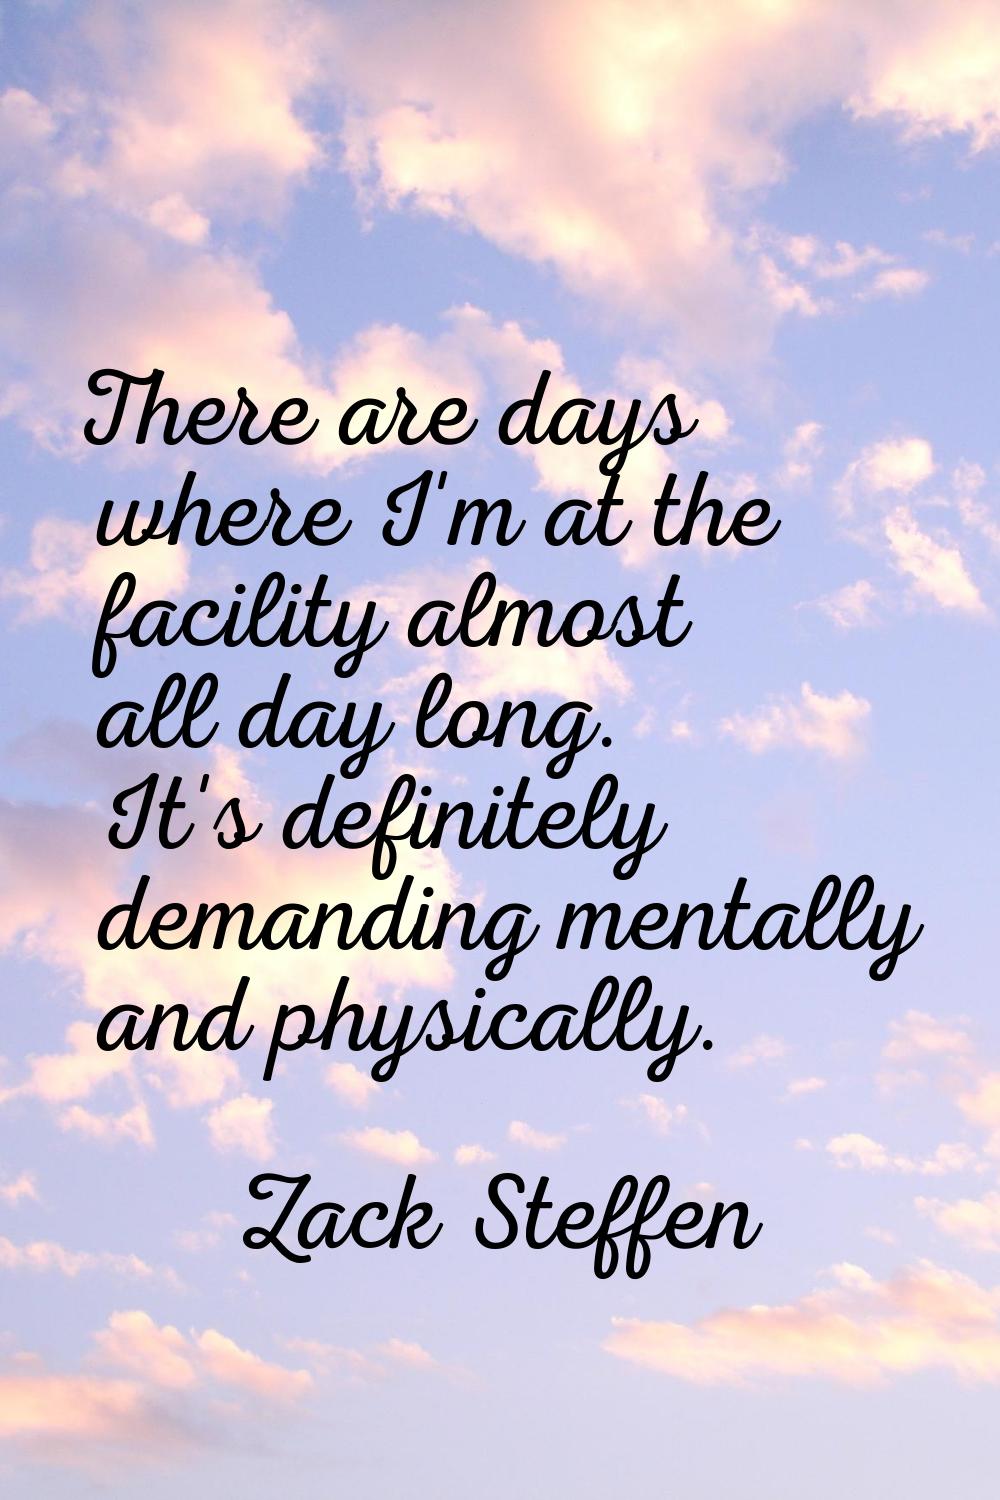 There are days where I'm at the facility almost all day long. It's definitely demanding mentally an